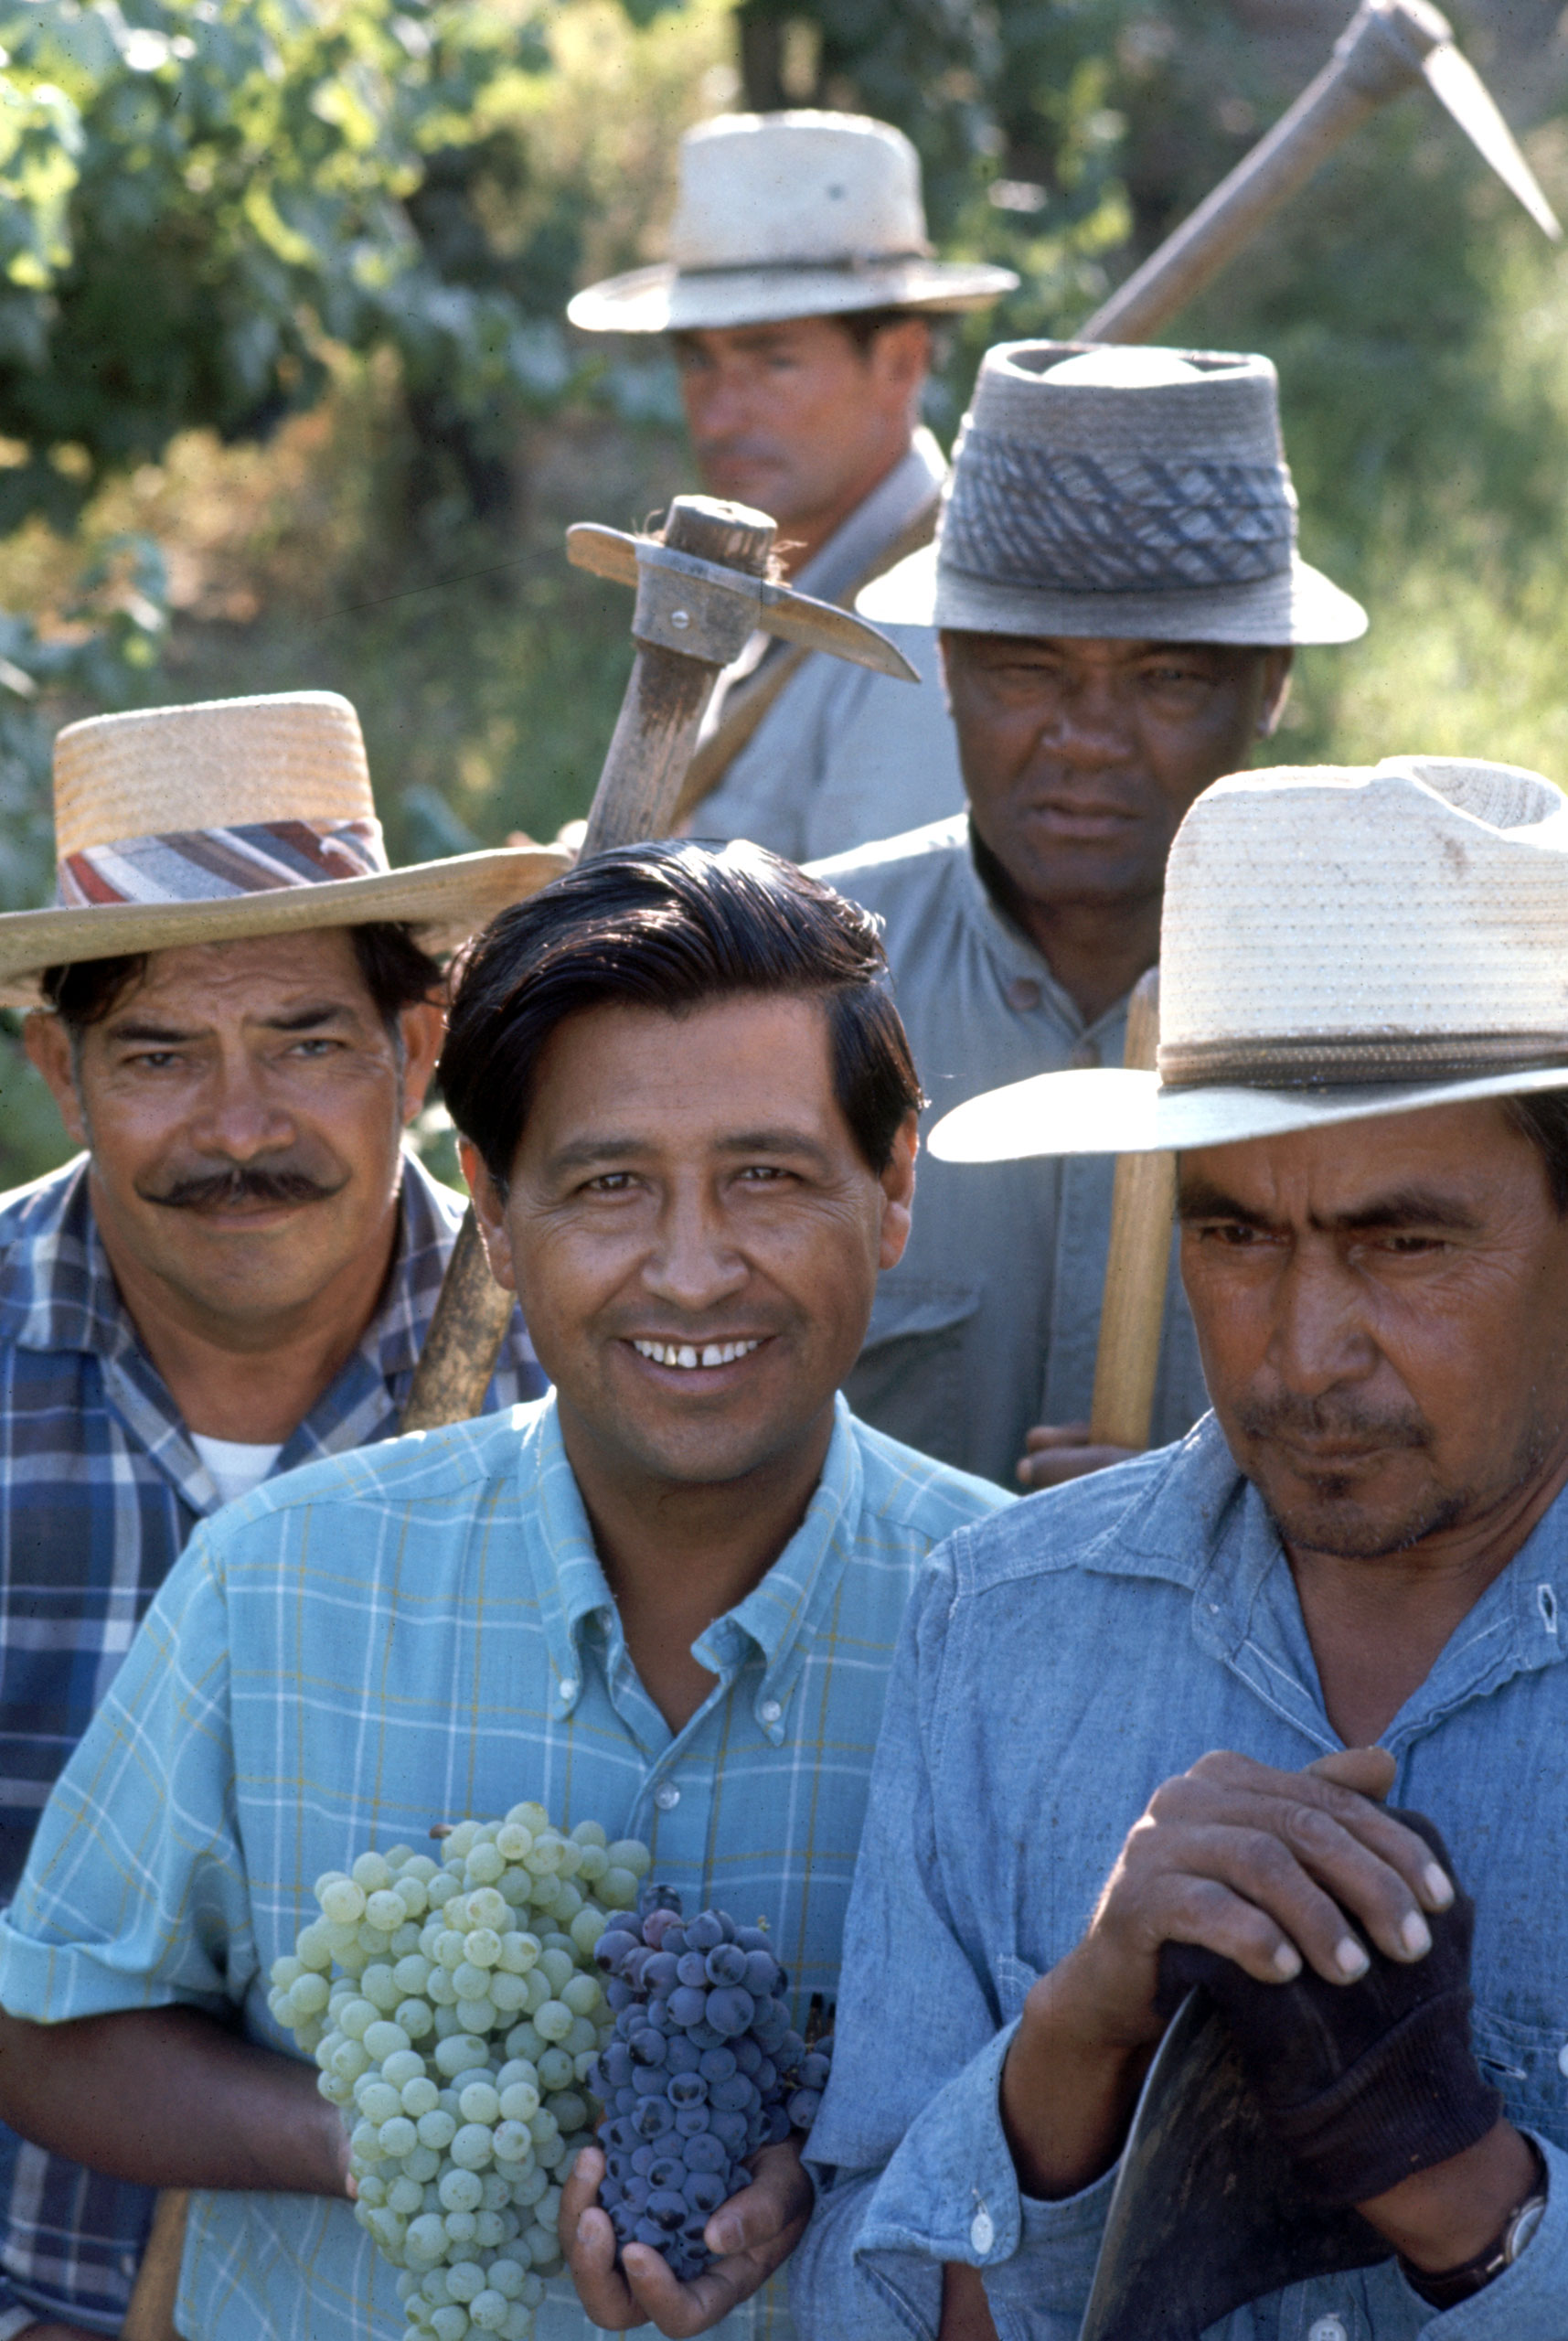 Labor activist Cesar Chavez with grape pickers in support of the United Farm Workers Union, Delano, California, 1968.